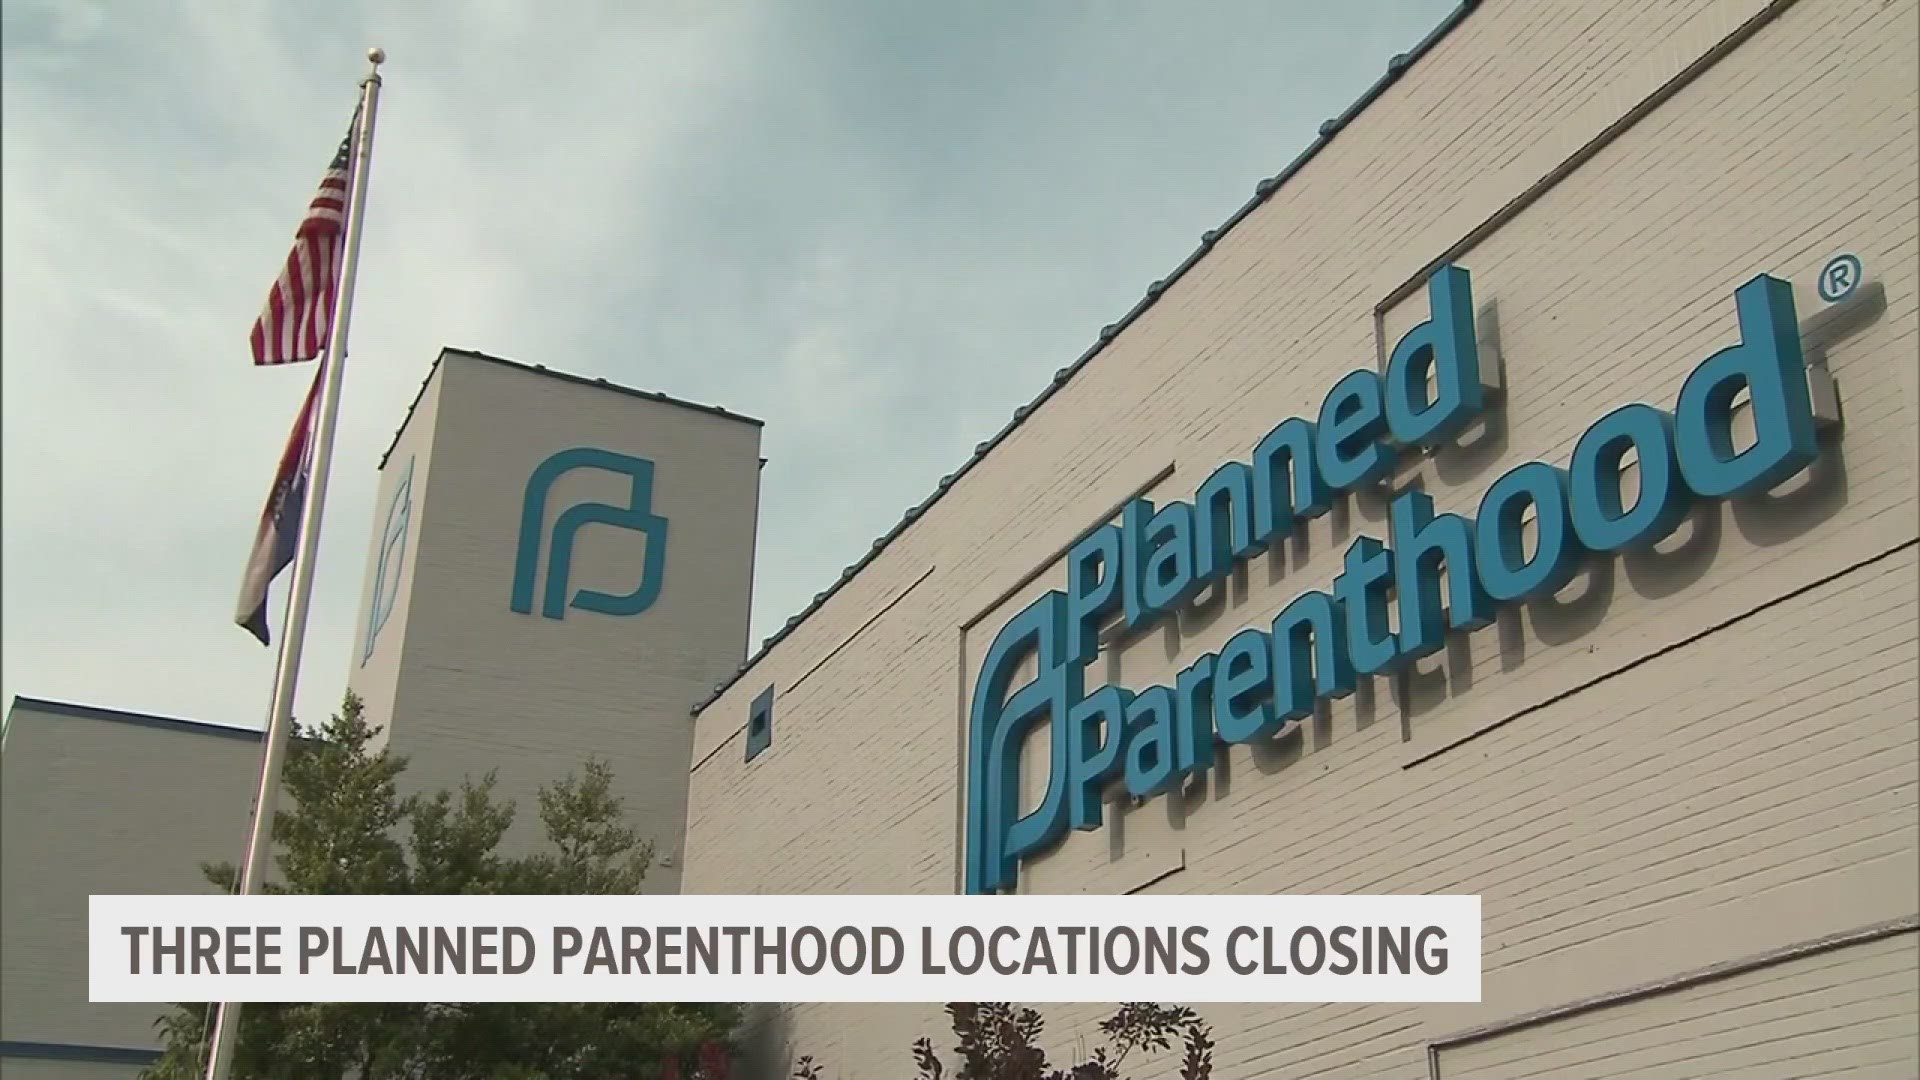 Planned Parenthood North Central States officials said, though the total number of locations will go down, patients receiving care will increase.